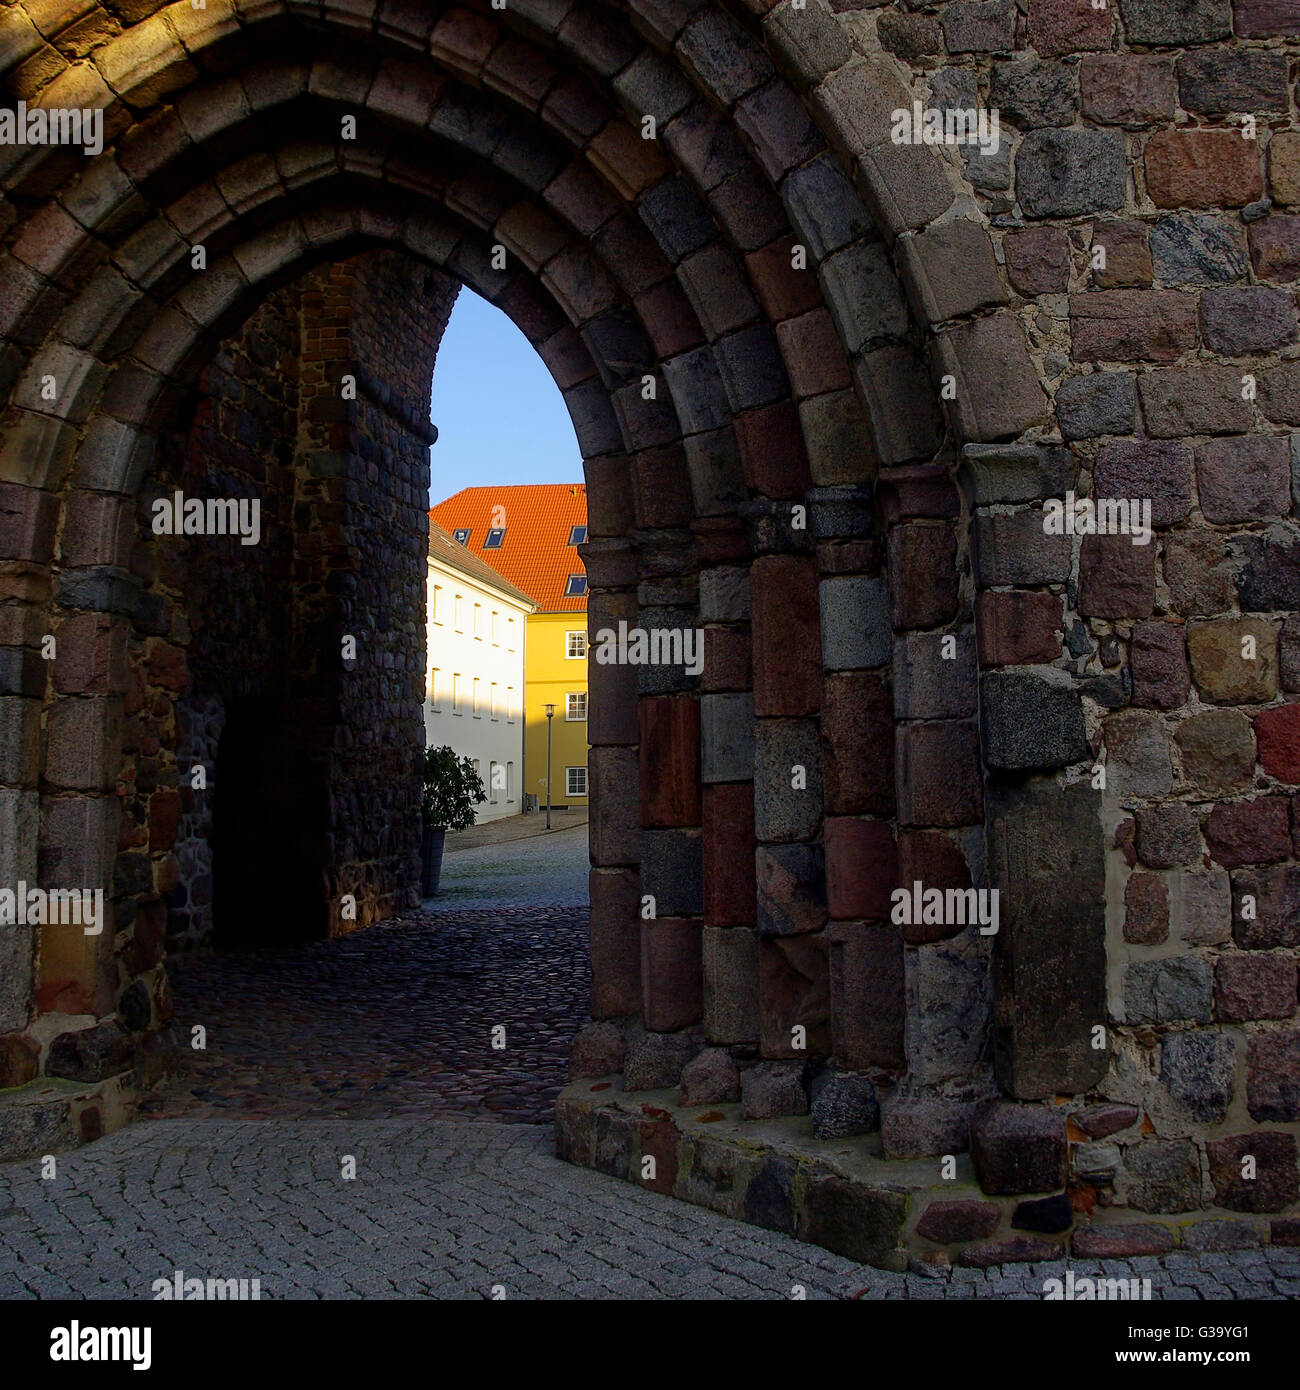 HISTORIC CITY GATE AND TOWNWALL Stock Photo